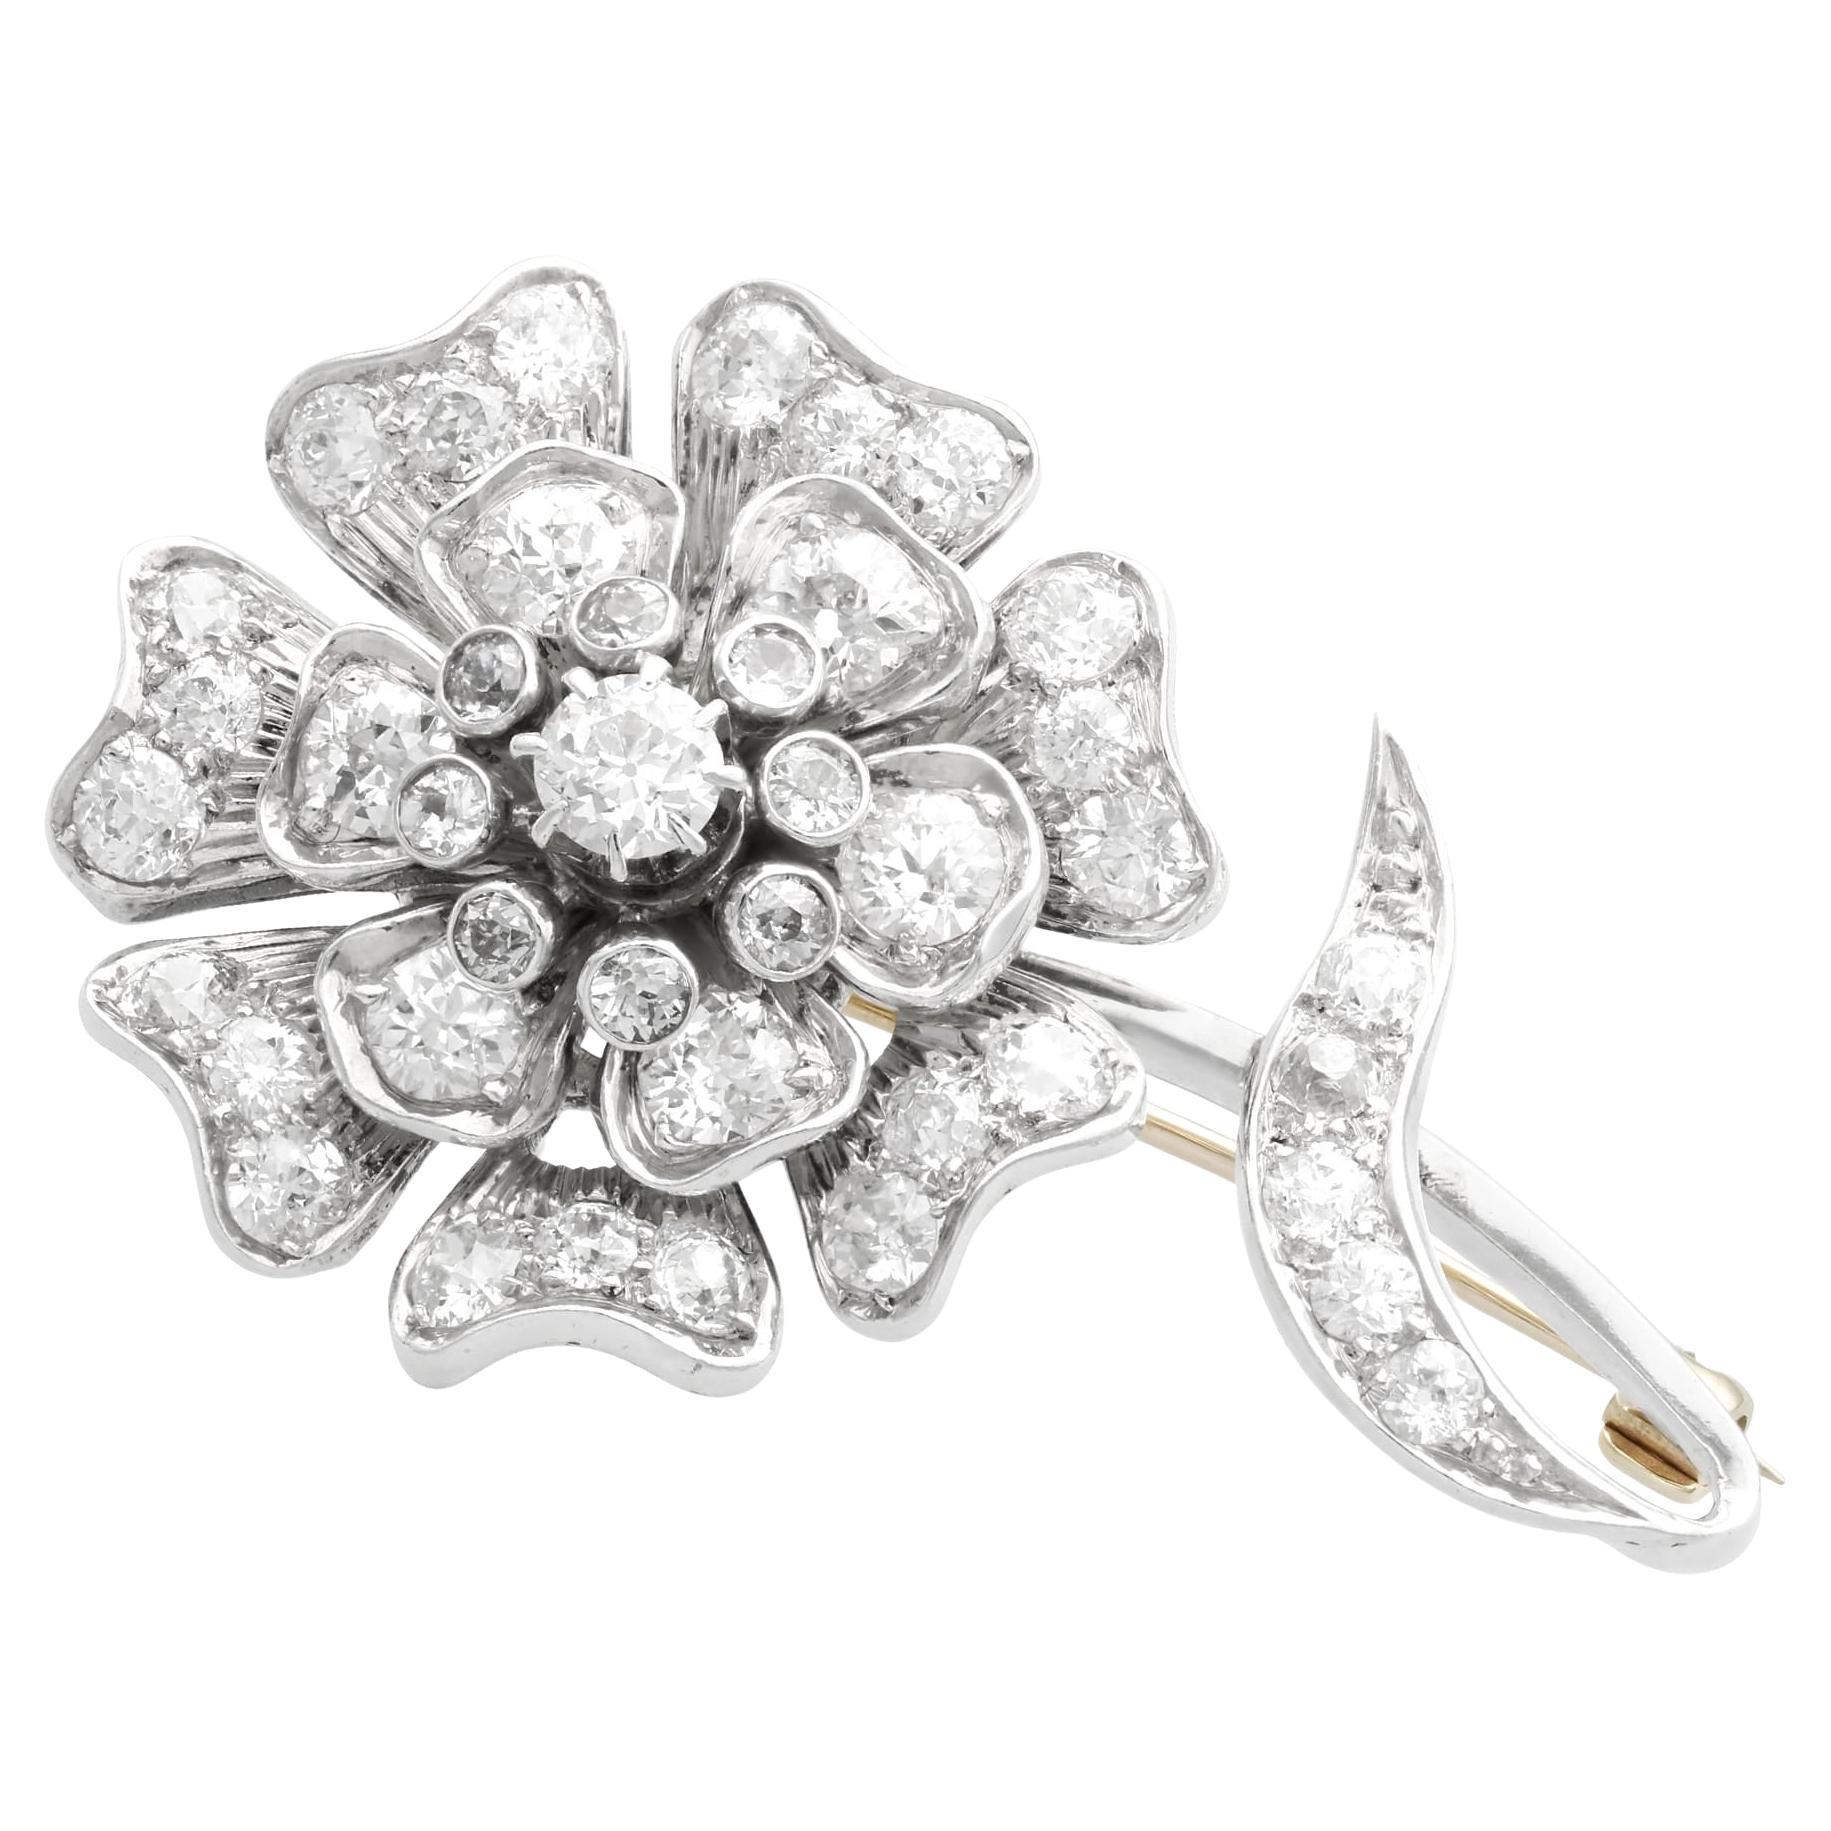 Antique 4.59Ct Diamond and 15k Yellow Gold Floral Brooch Circa 1880 For Sale